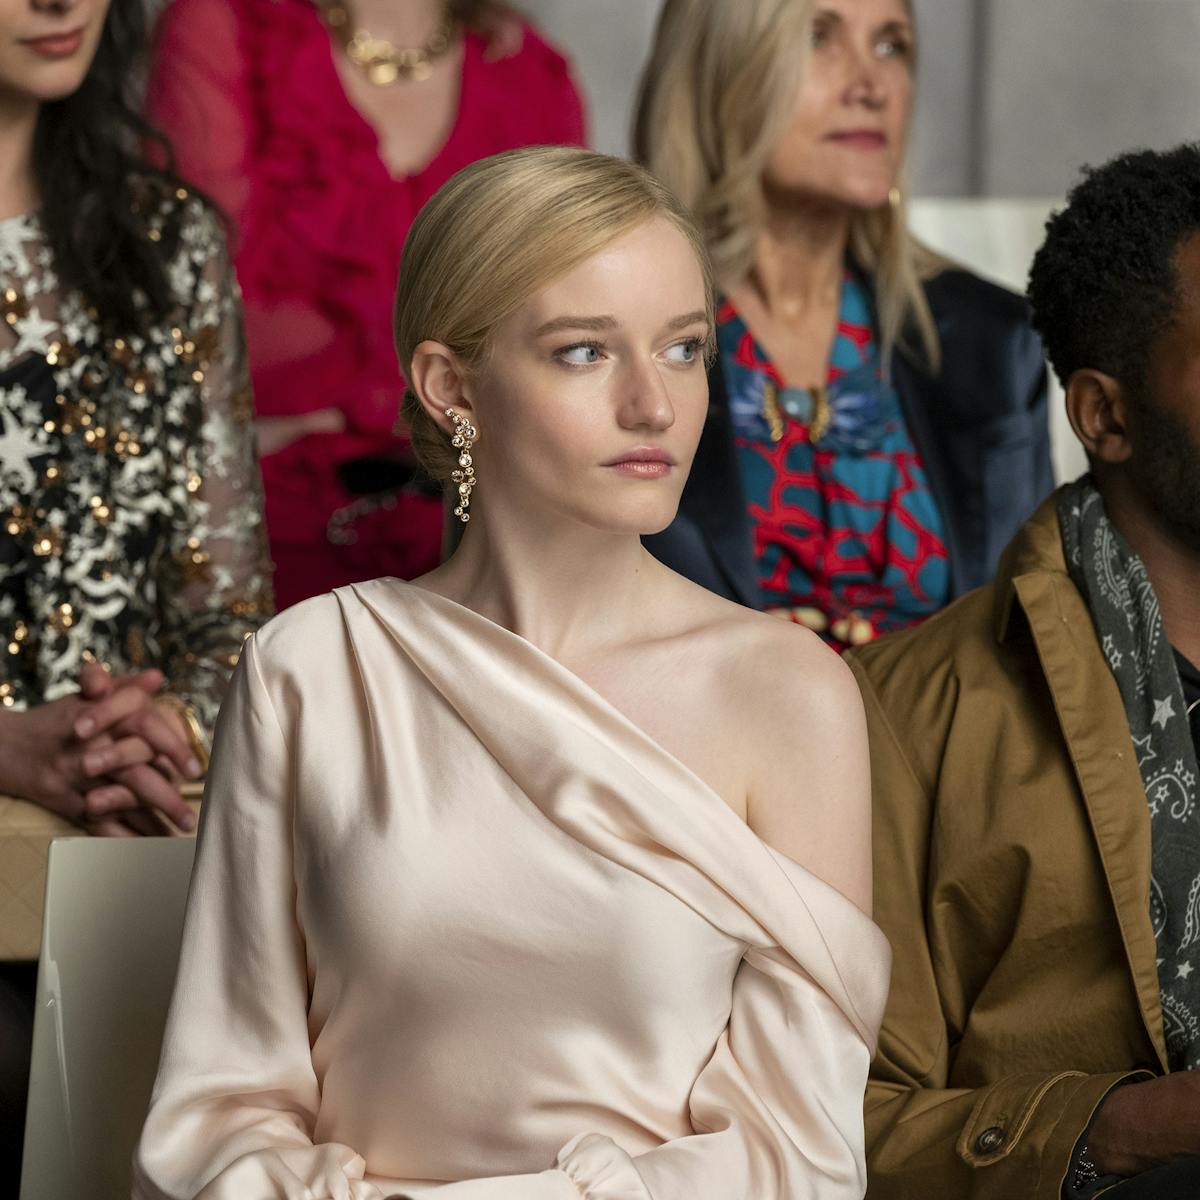 Anna Delvey wears a pale pink dress and sits front row at a fashion show.